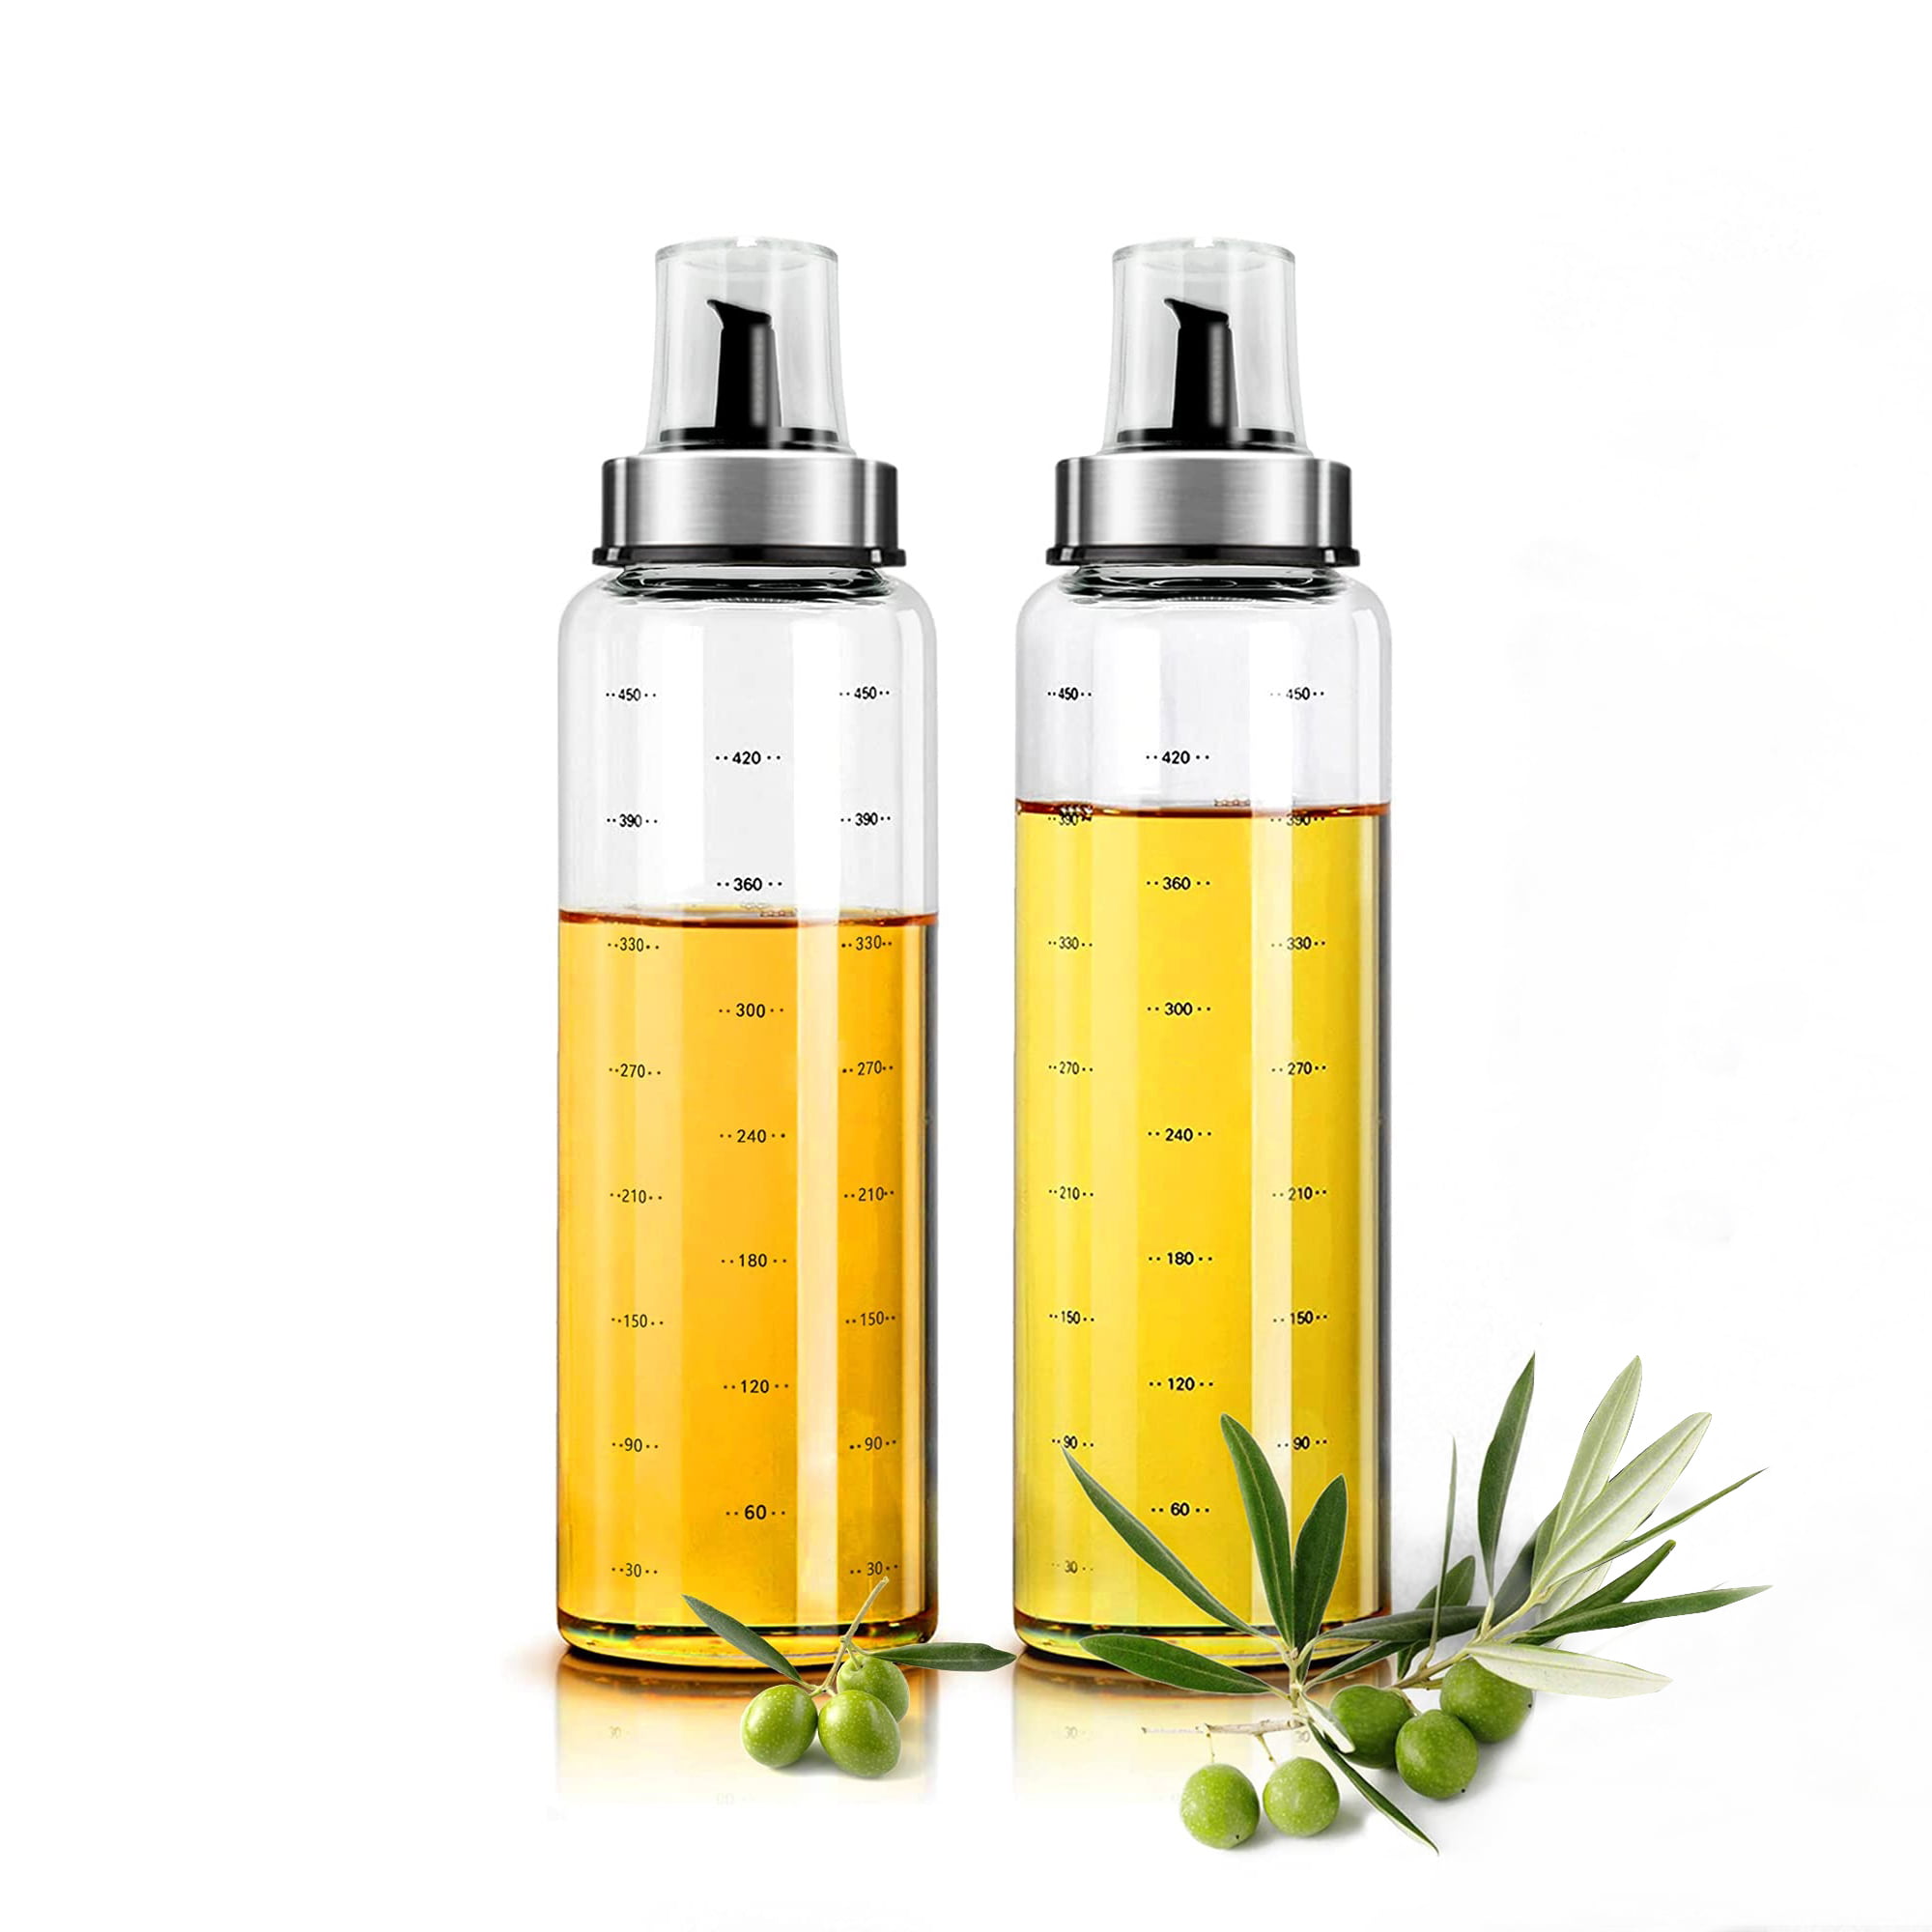 2 Pack 17 OZ Olive Oil Dispenser Bottle,Automatic opening and closing oil pot,17 Ounce Cooking Oil Cruet Glass,No Drip,Big Oil and Vinegar Dispenser Lead-Free Glass Oil Dispenser for Kitchen 